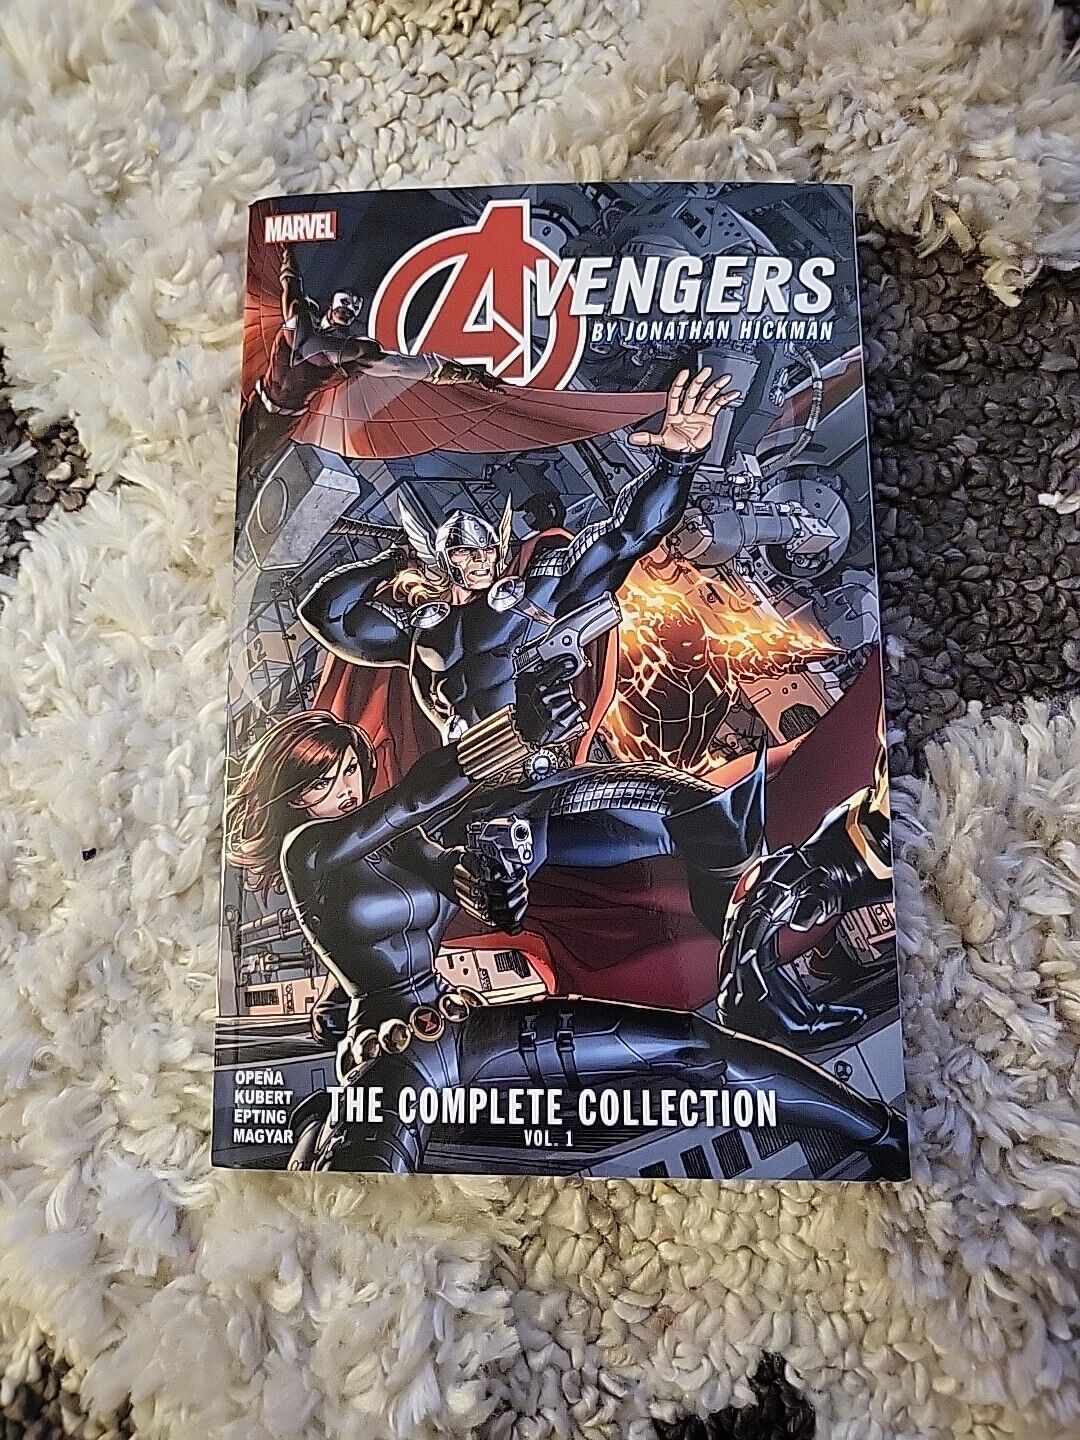 Avengers by Jonathan Hickman: The Complete Collection Vol. 1